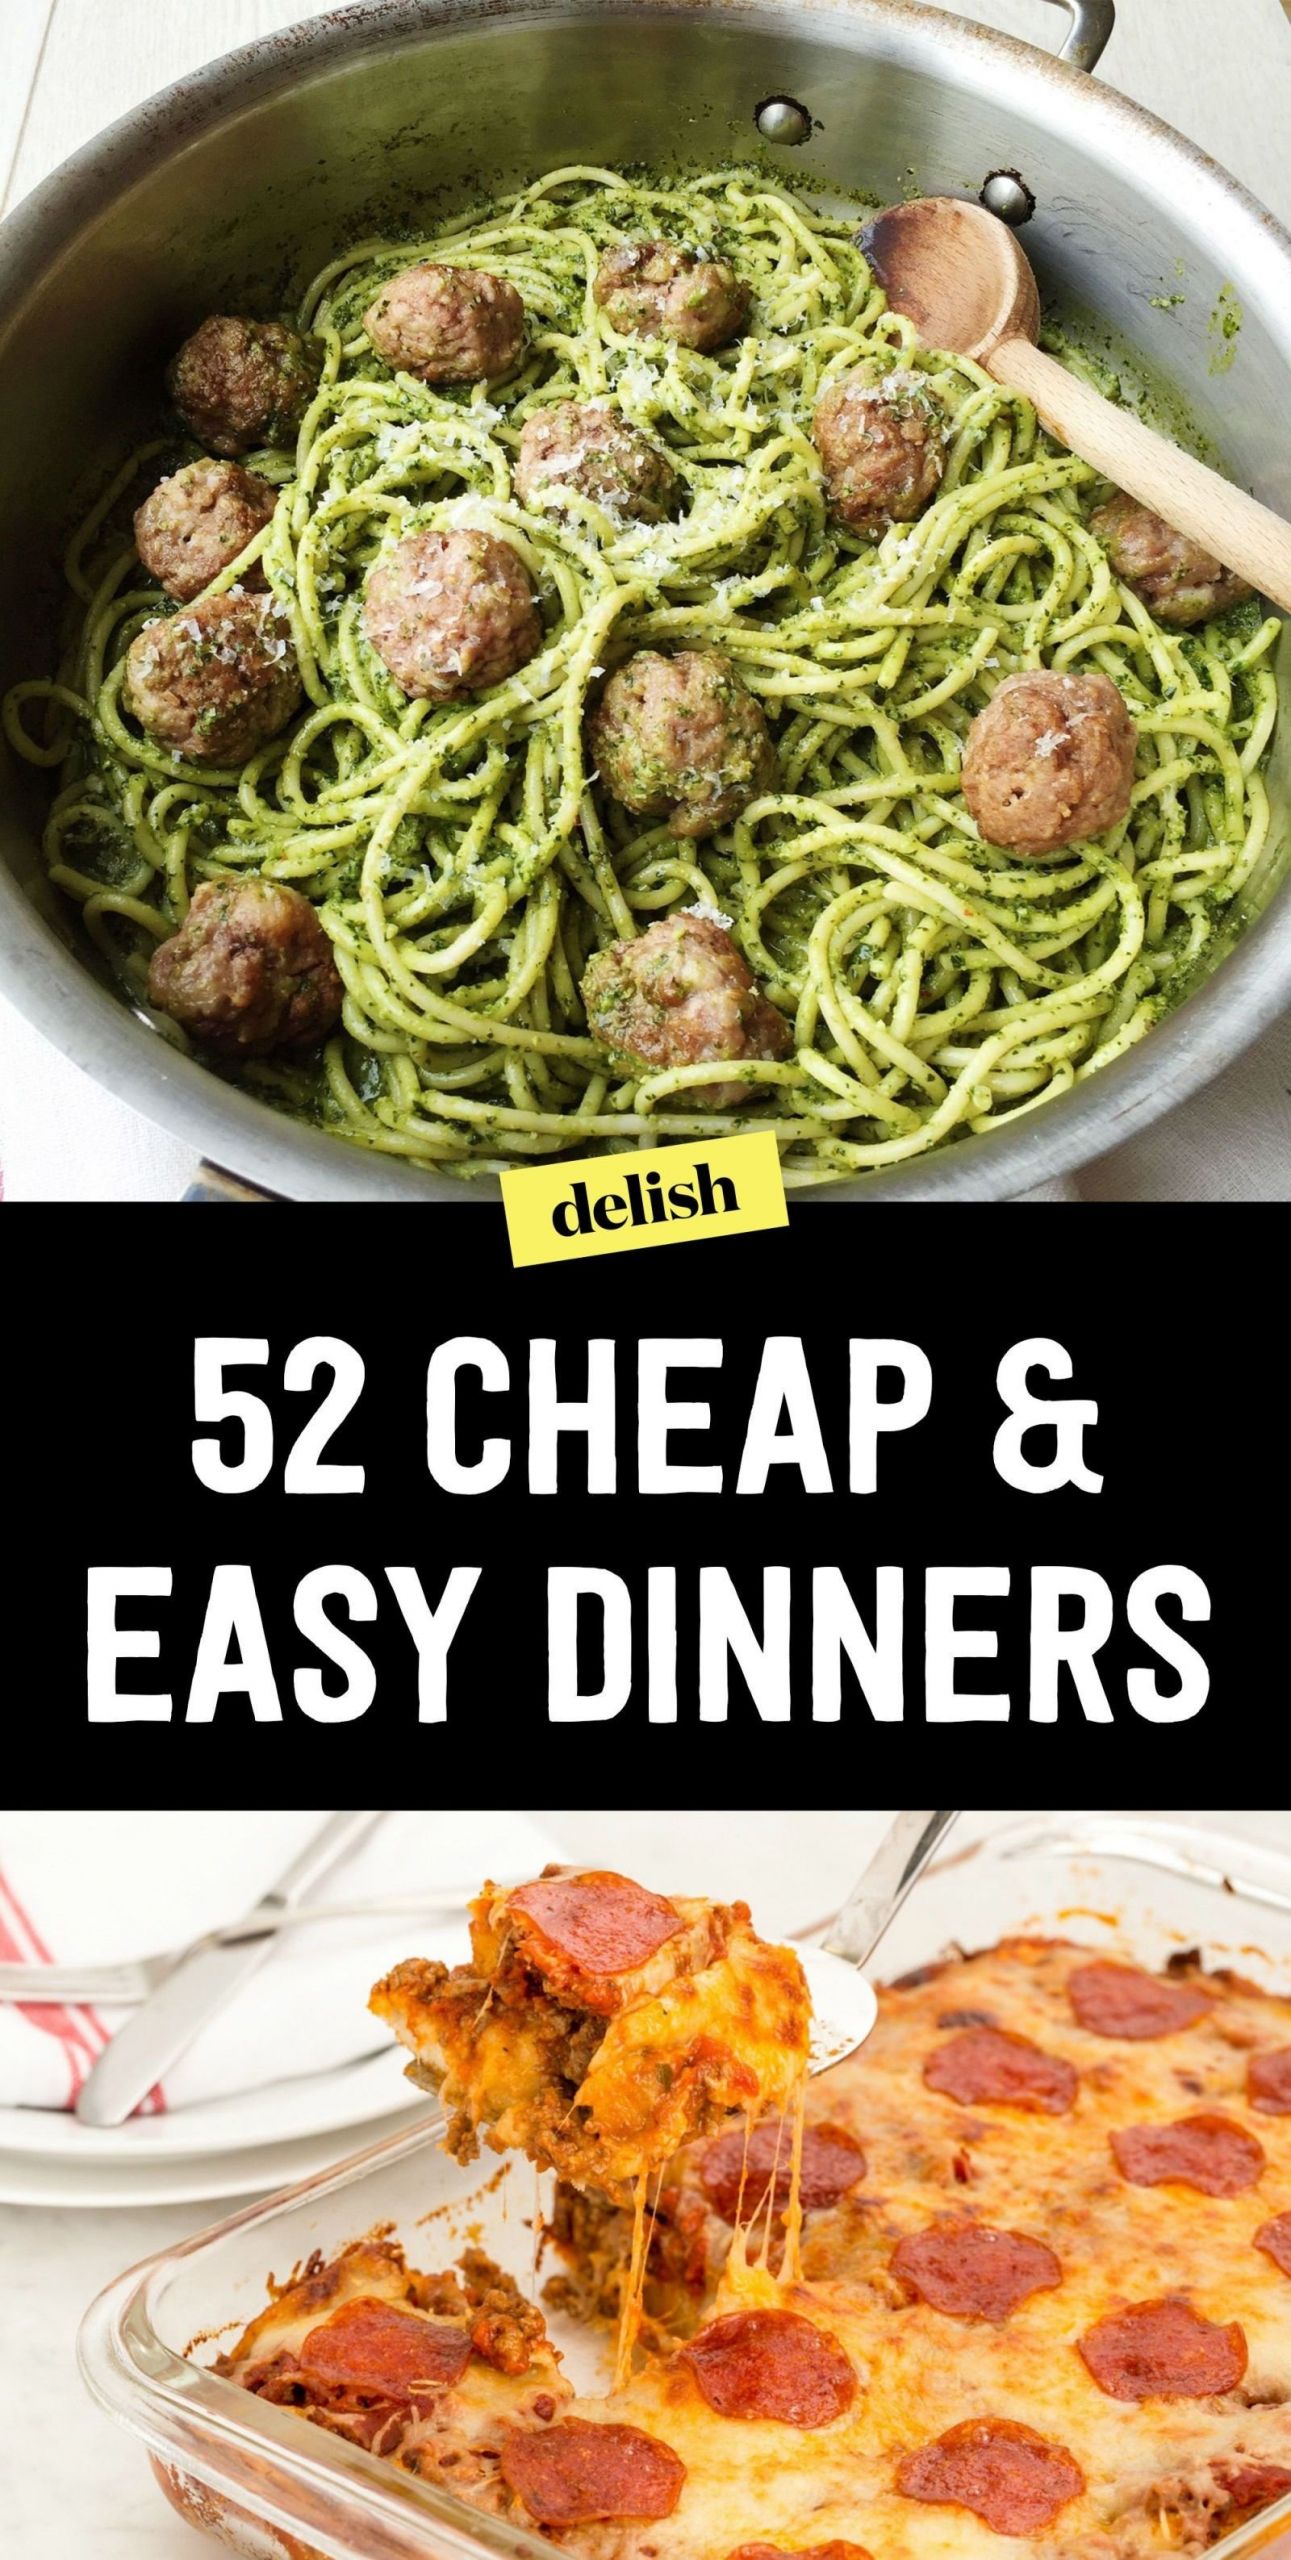 Easy Dinner Recipes For Two Cheap
 10 Great Cheap Meal Ideas For 2 2019